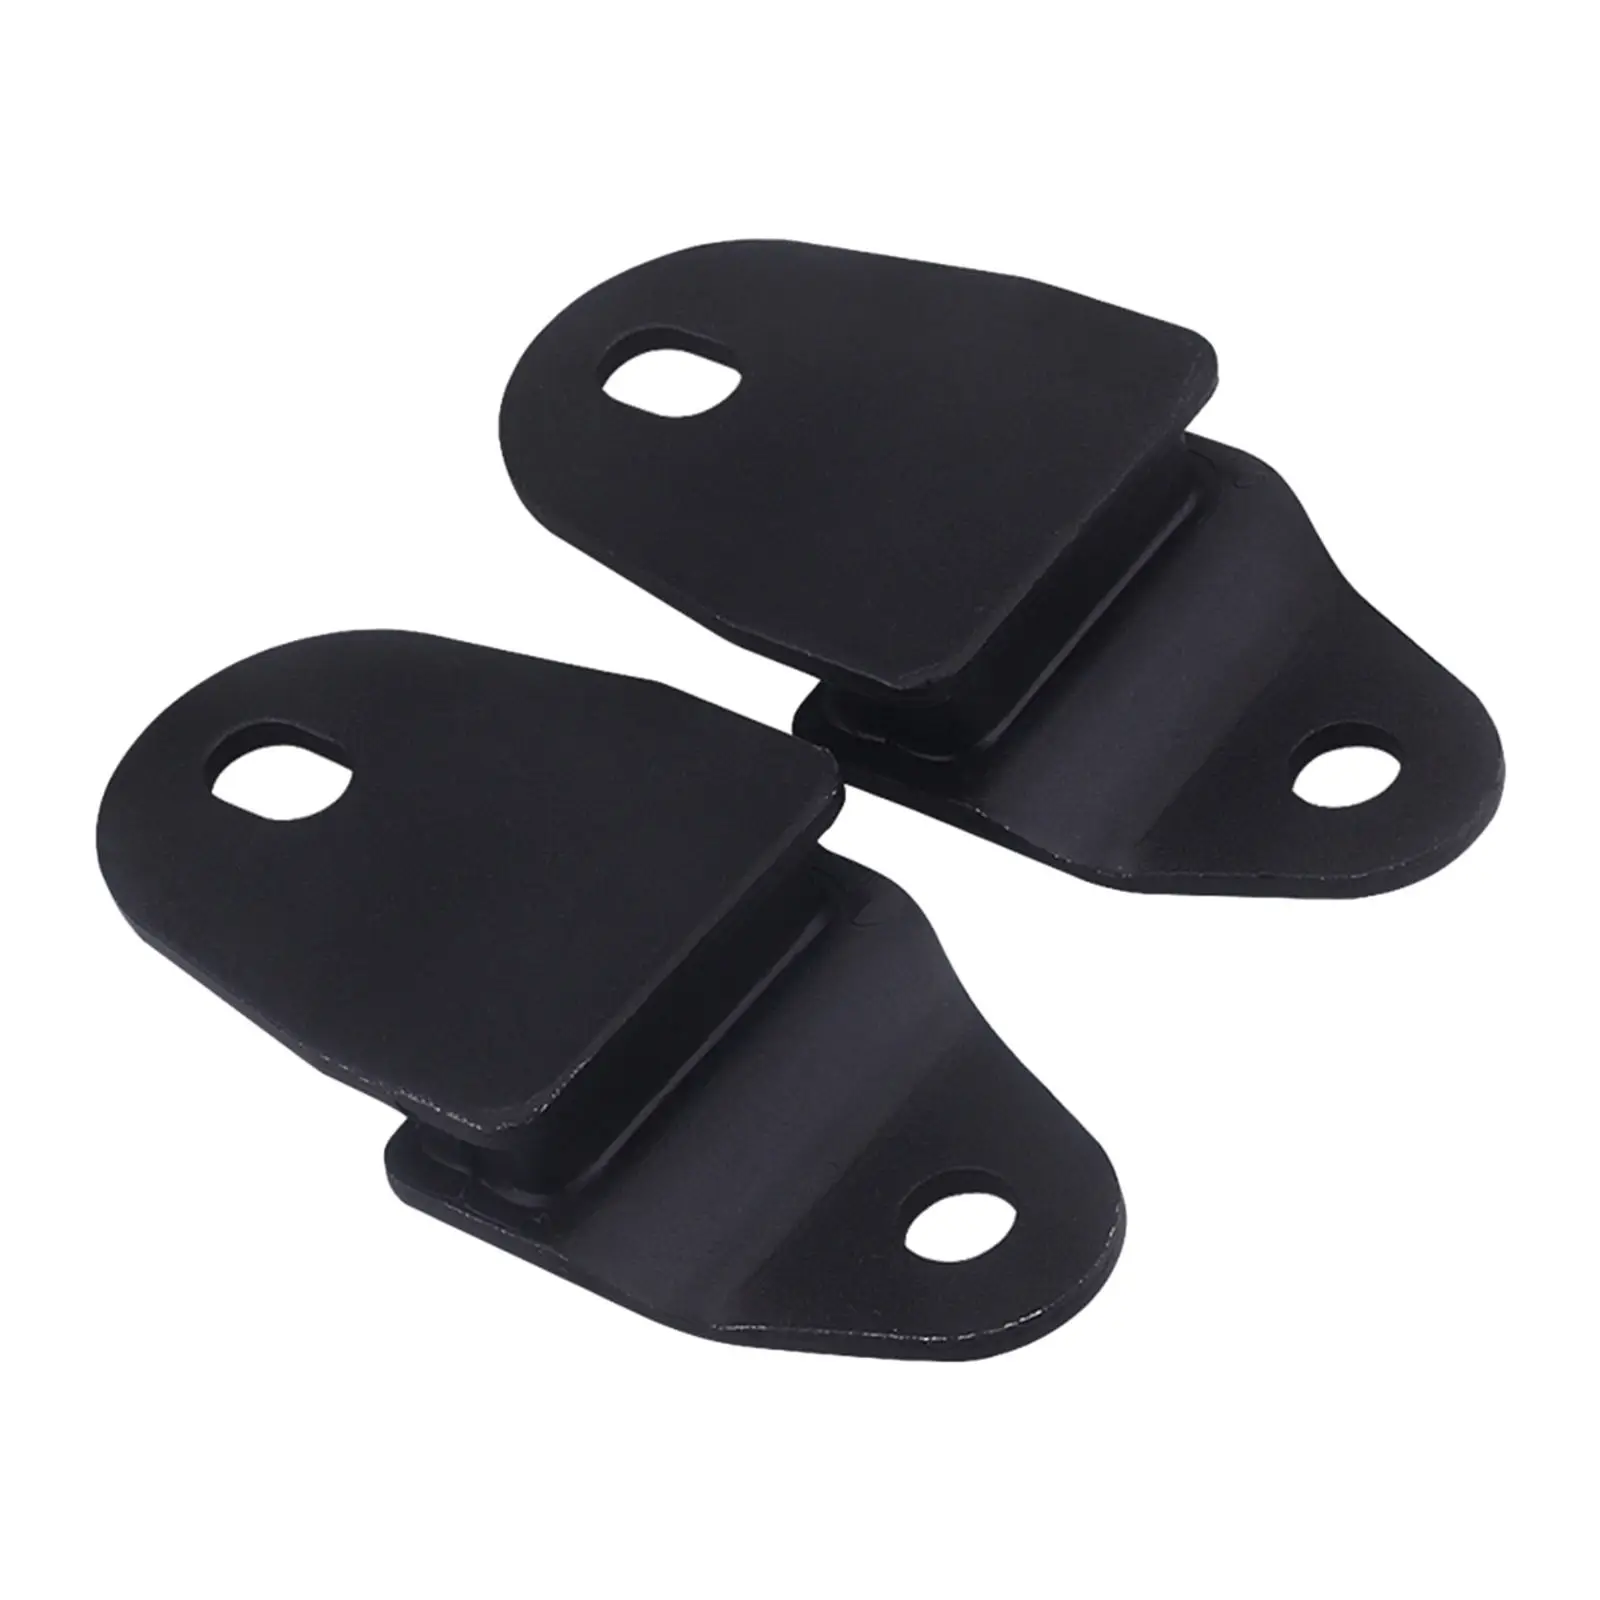 1 Pair Exhaust Muffler Pipe Bracket Stays Mounts Hangers Replacement Fit for Yamaha Banshee 350 YFZ350 1987-2006